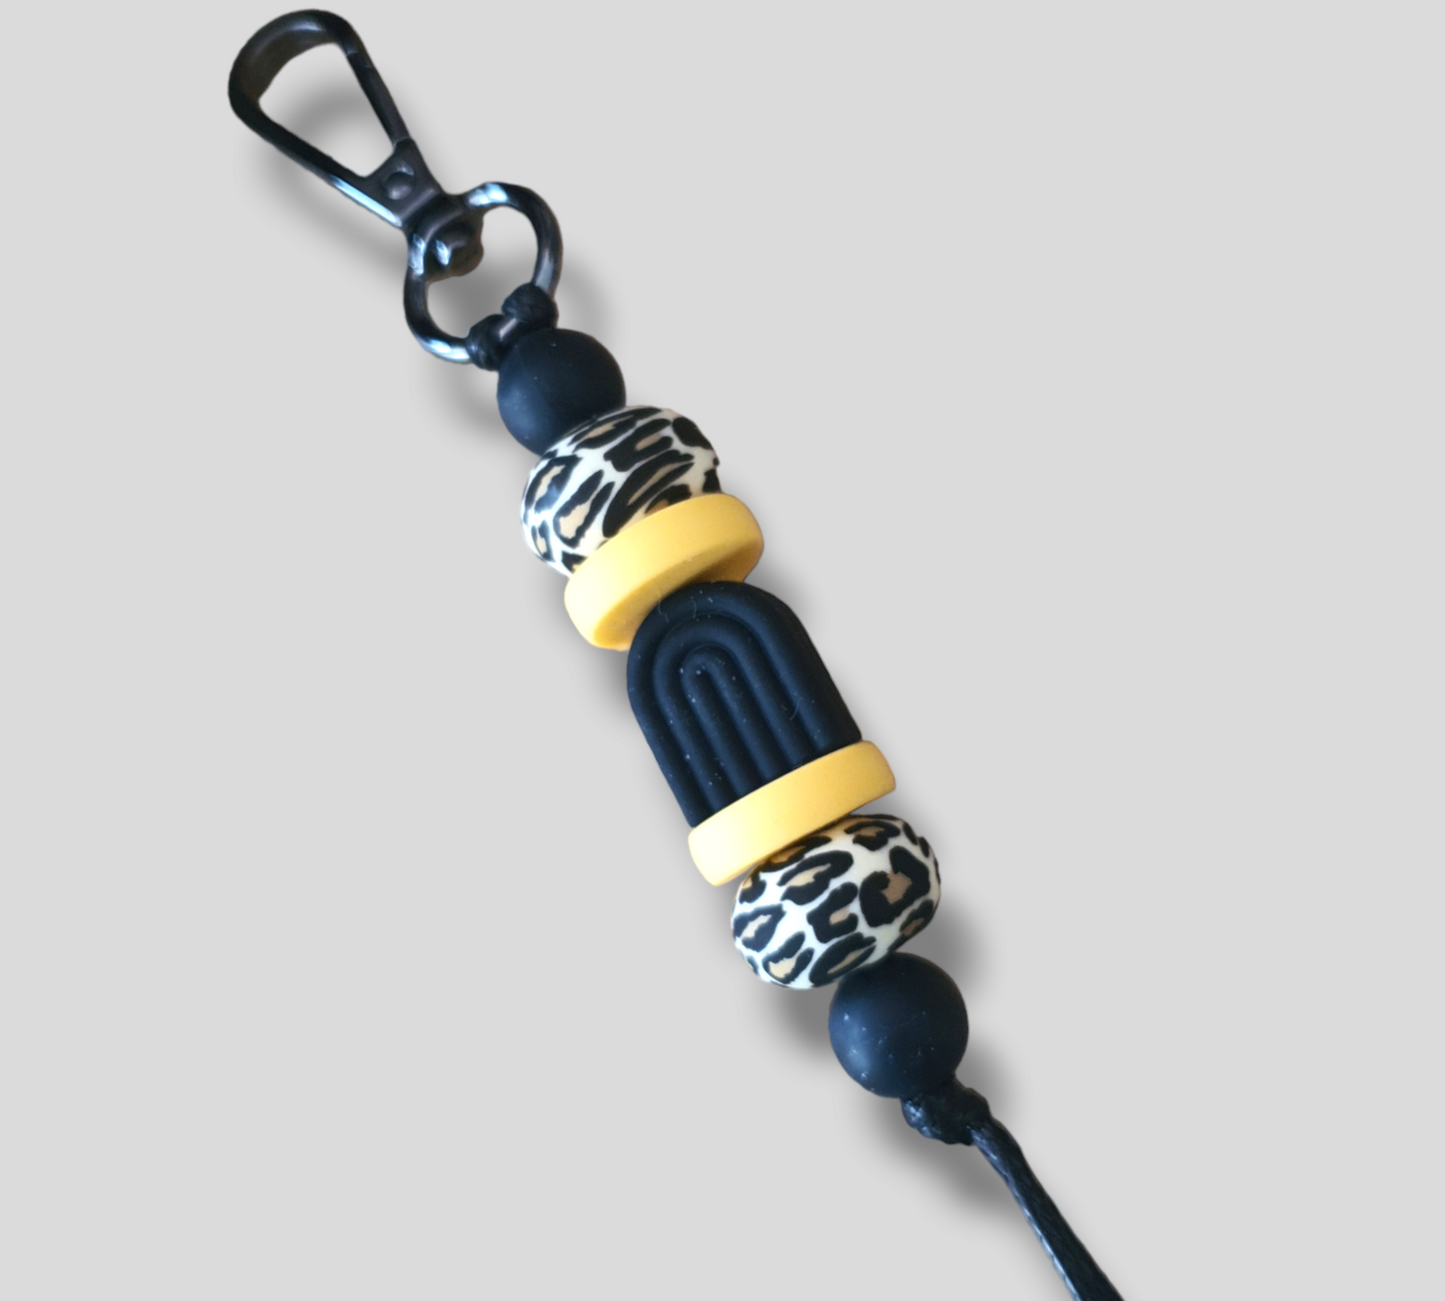 Yellow Black and Gold "Bee Collection" | Handmade Keyring or Lanyards - PeppaTree Design Store